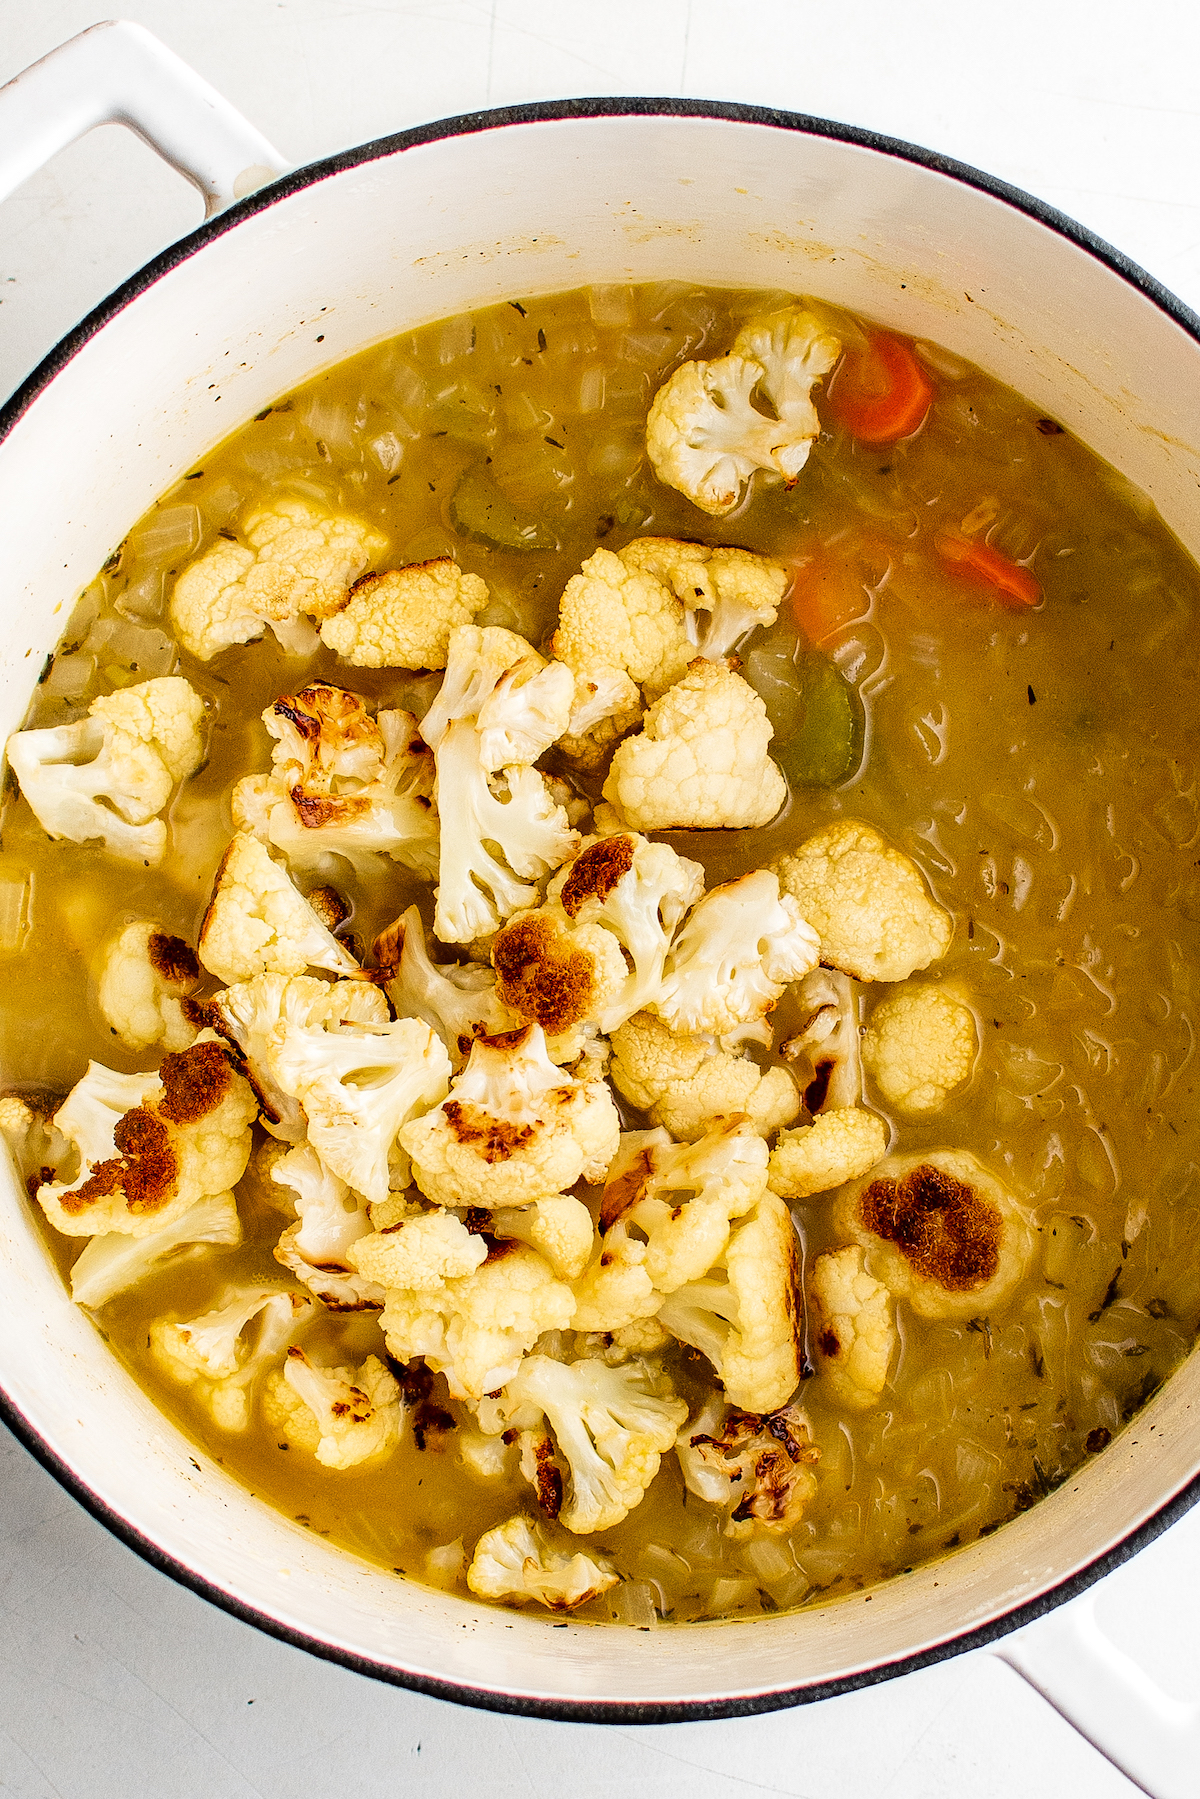 Roasted cauliflower added to a pot of soup.